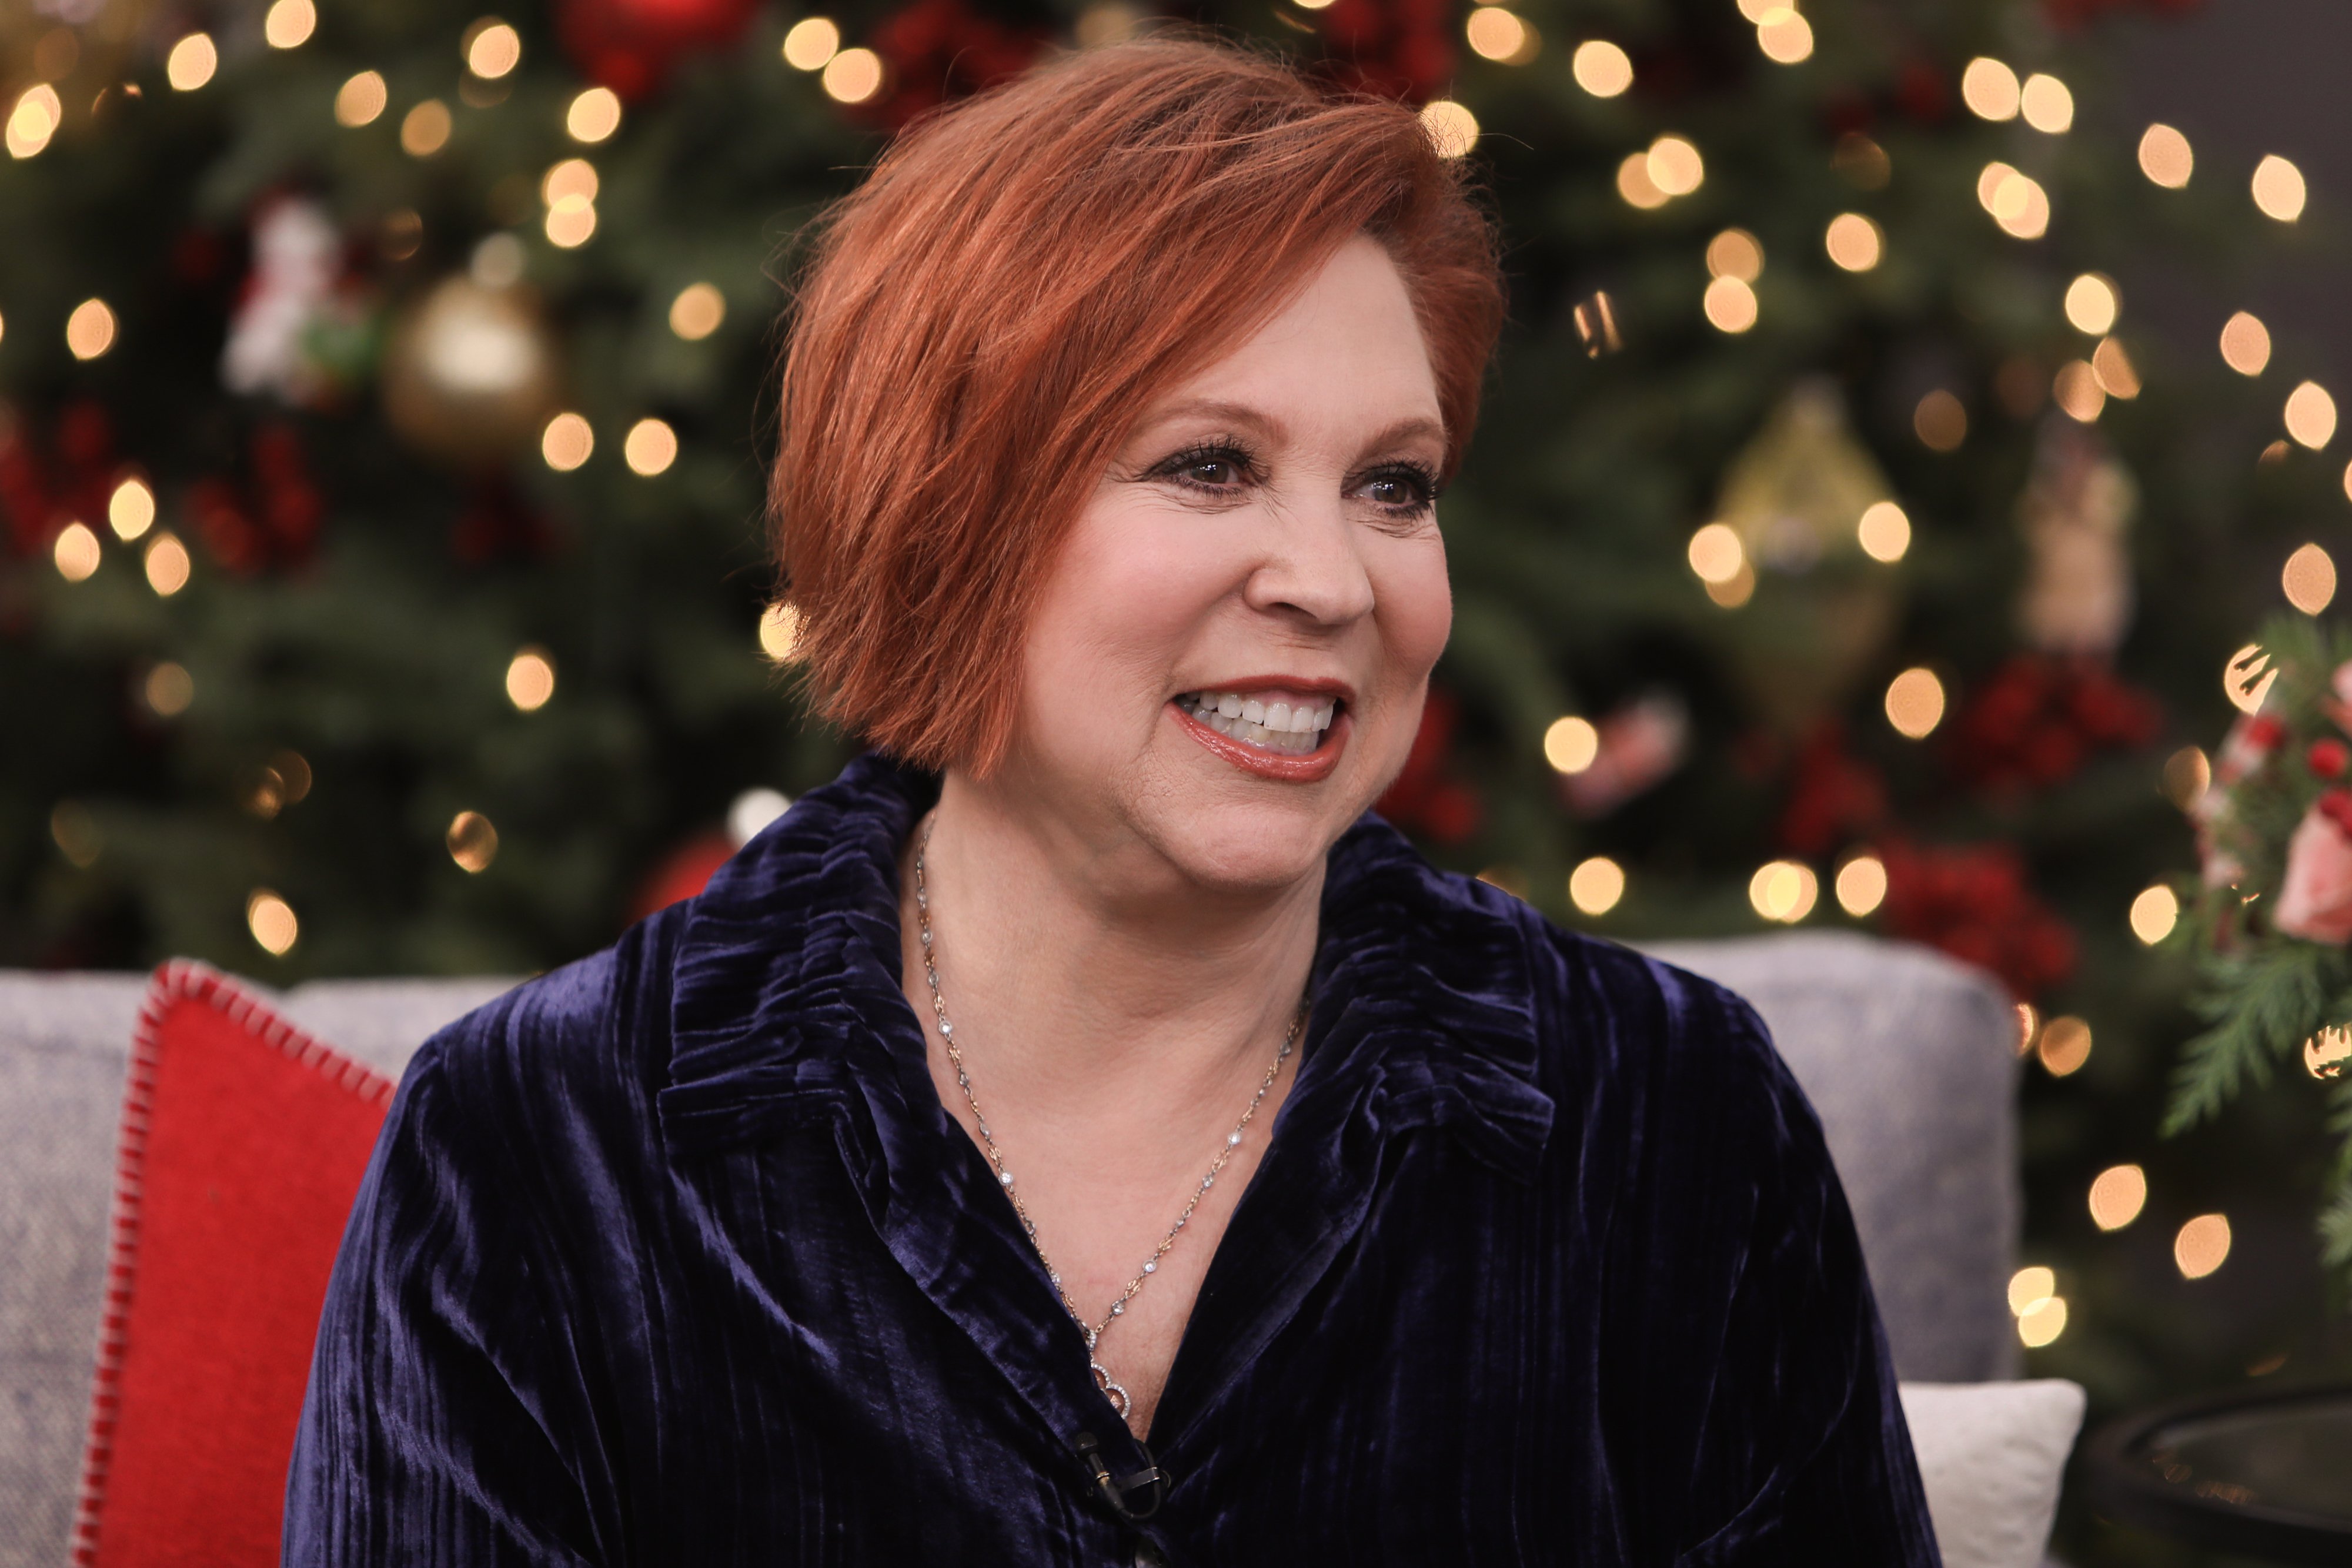 Vicki Lawrence visits Hallmark Channel's "Home & Family" at Universal Studios Hollywood on November 05, 2019. | Photo: Getty Images